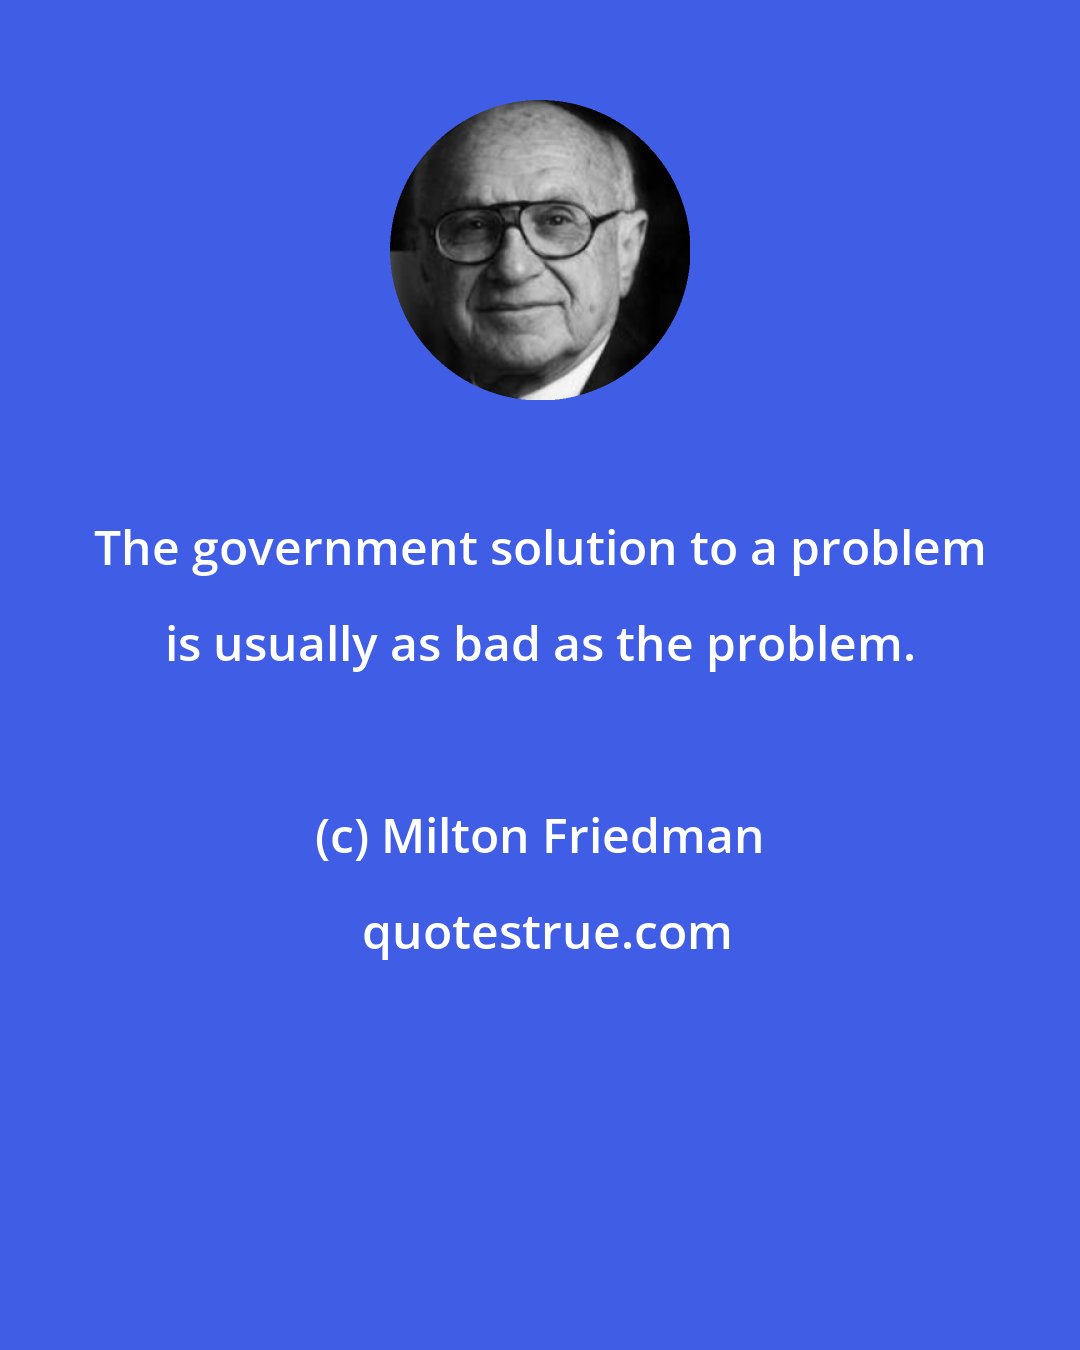 Milton Friedman: The government solution to a problem is usually as bad as the problem.